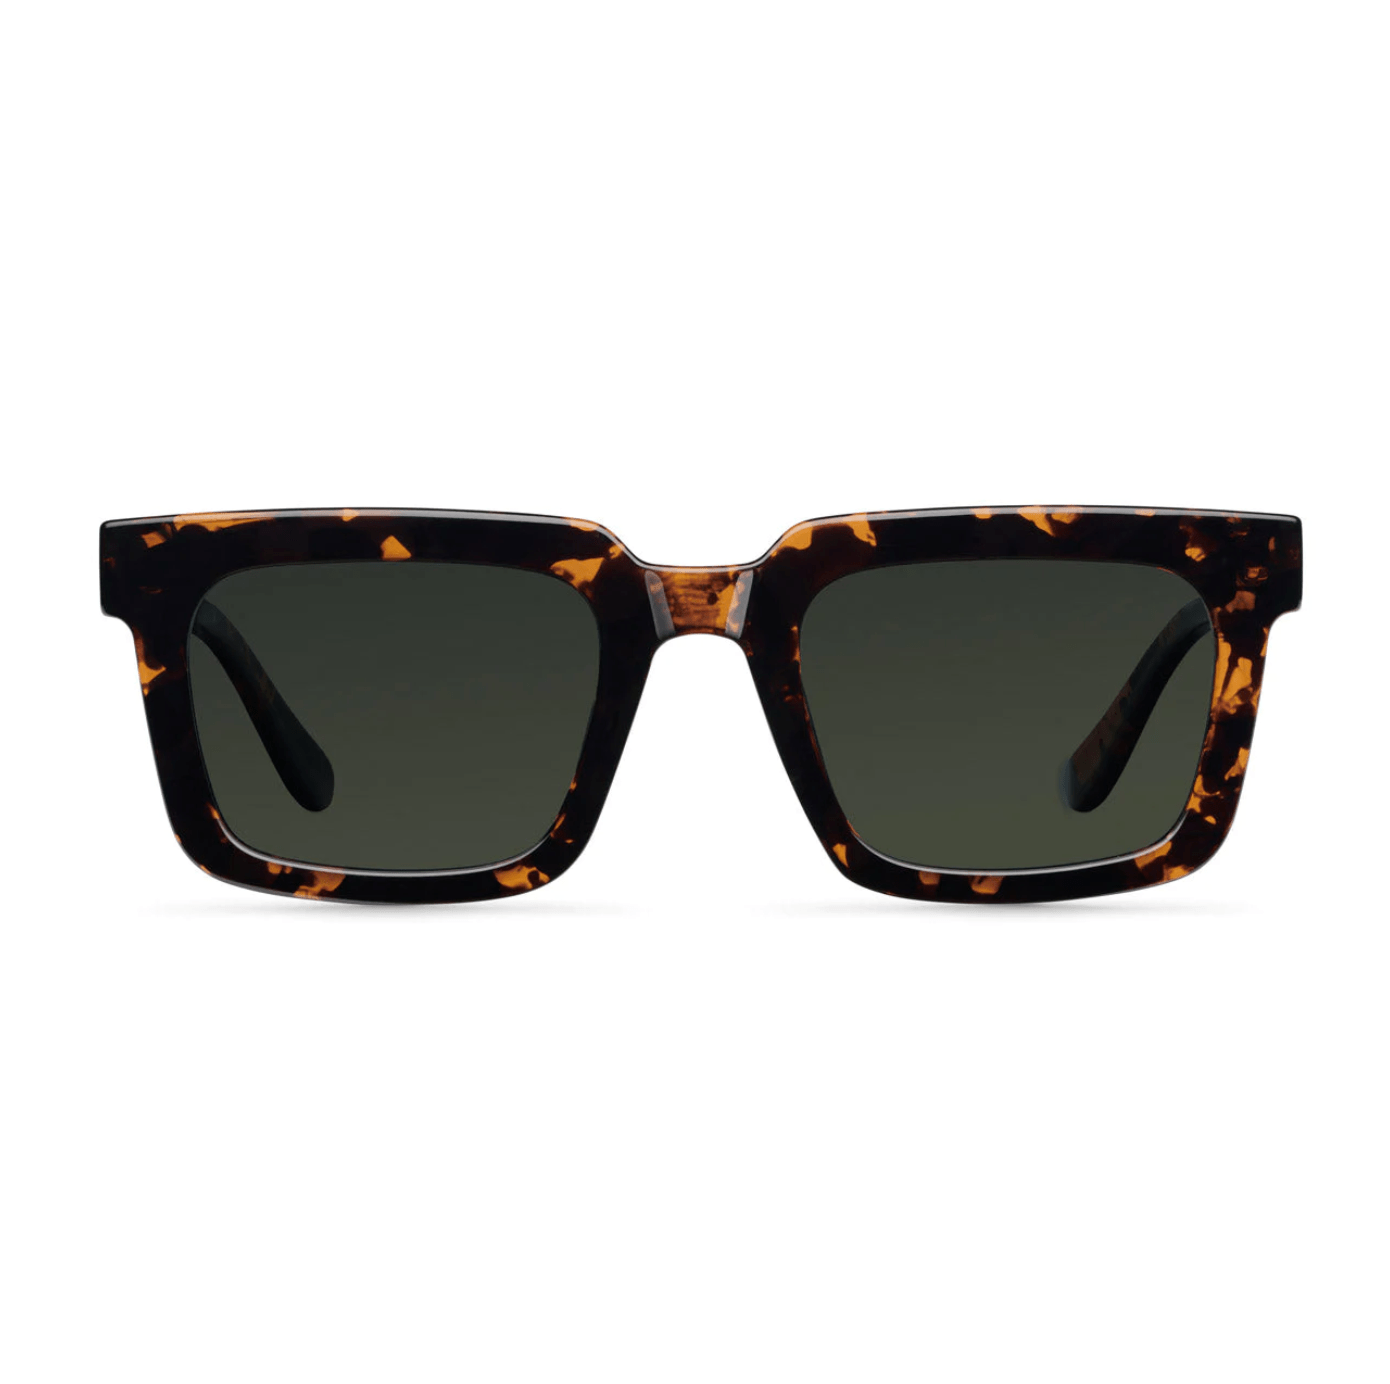 meller sunglasses. They stand out for their square design and elegant colours